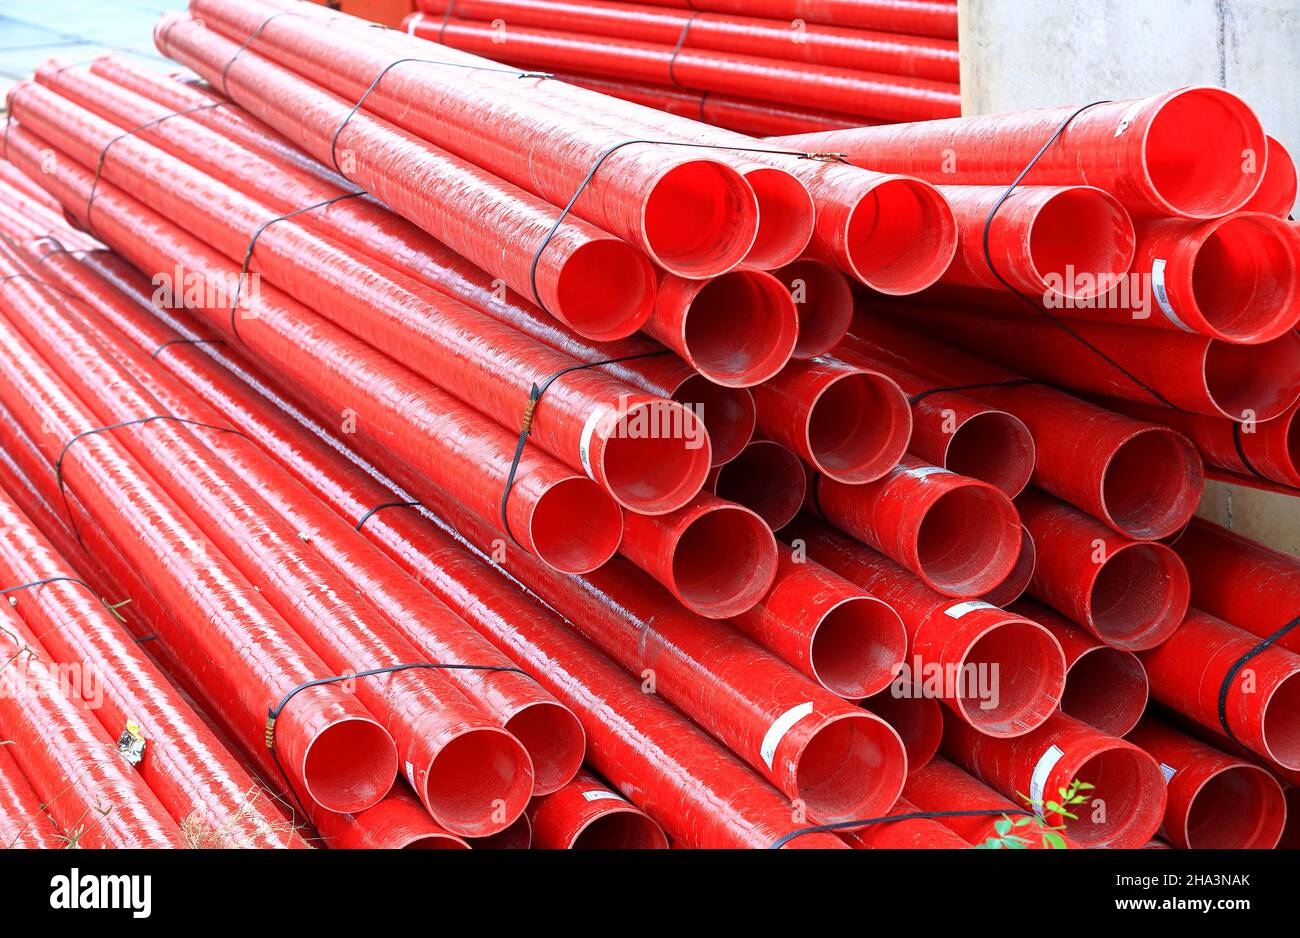 Red Fiberglass pipes at construction site, Corrosion resistant fiberglass composite pipe used in industrial applications. Stock Photo